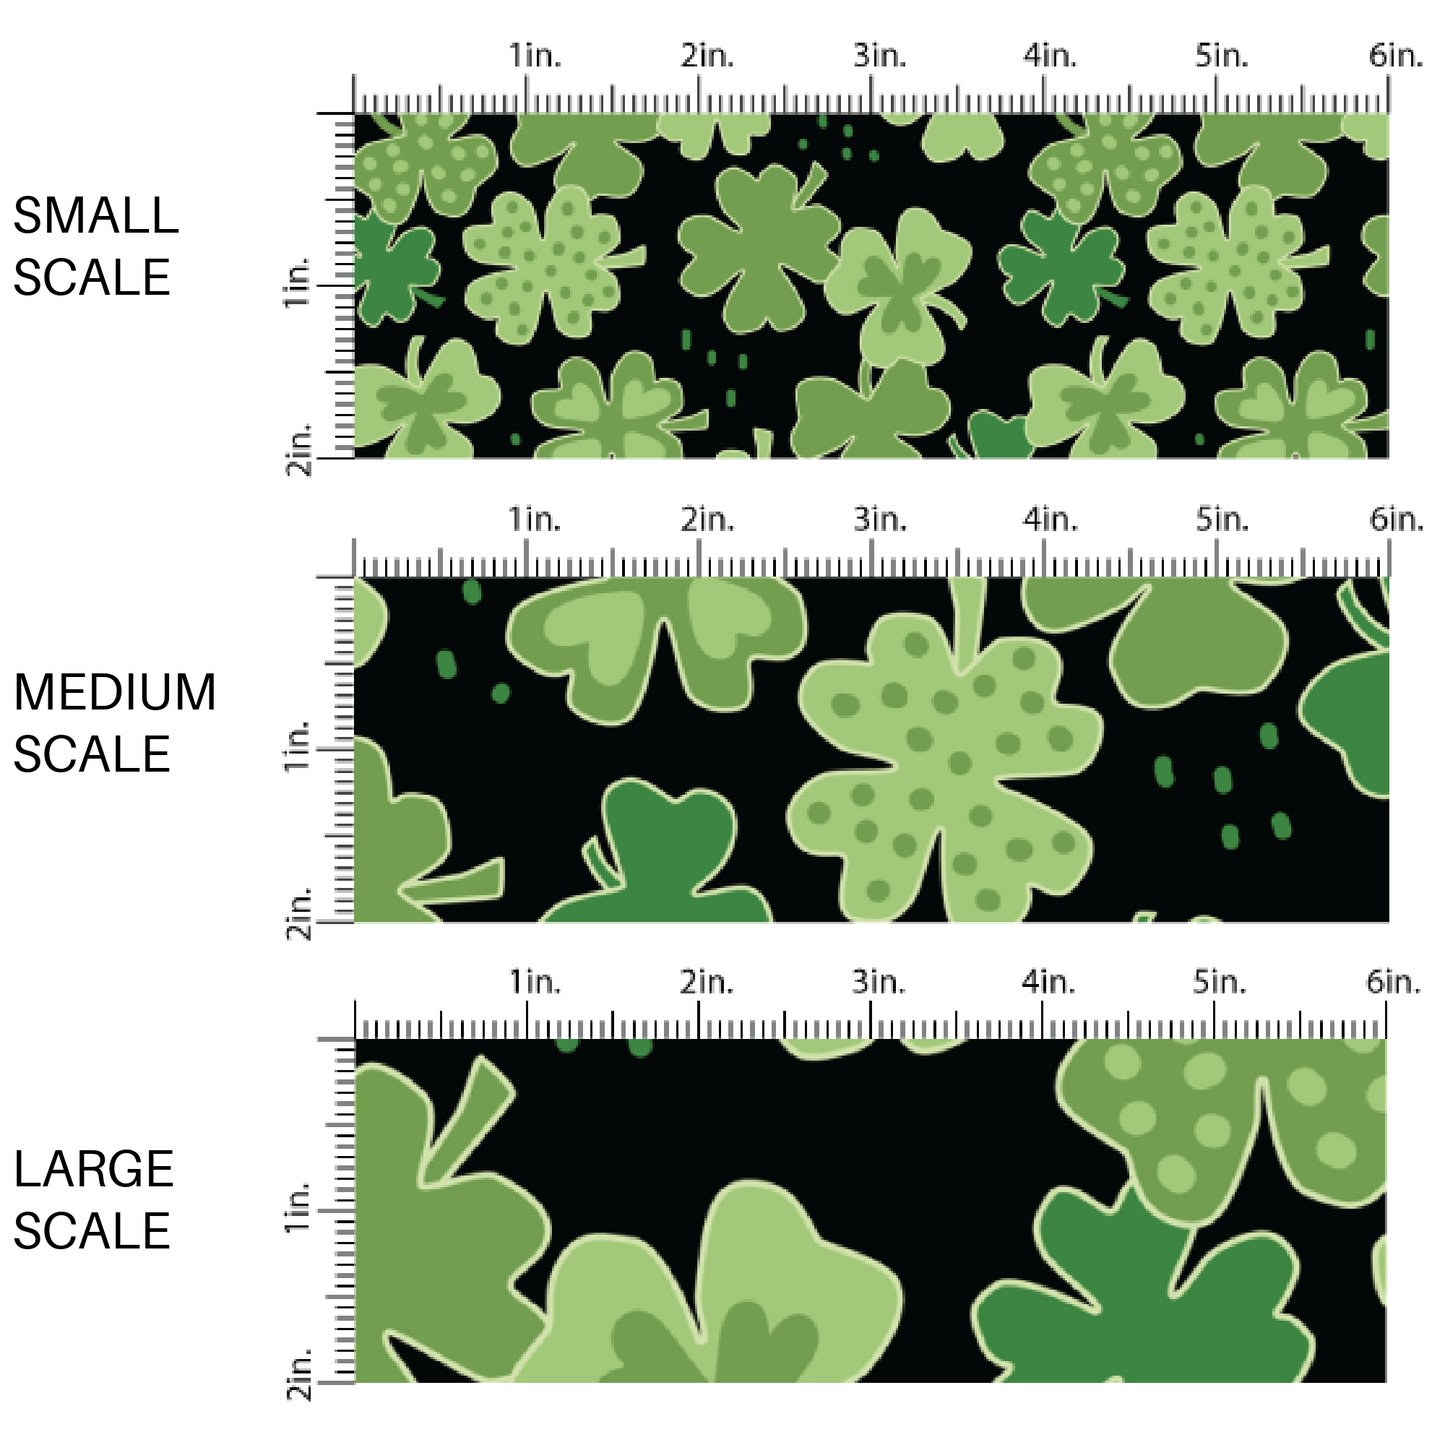 Black fabric by the yard scaled image guide with green shamrocks